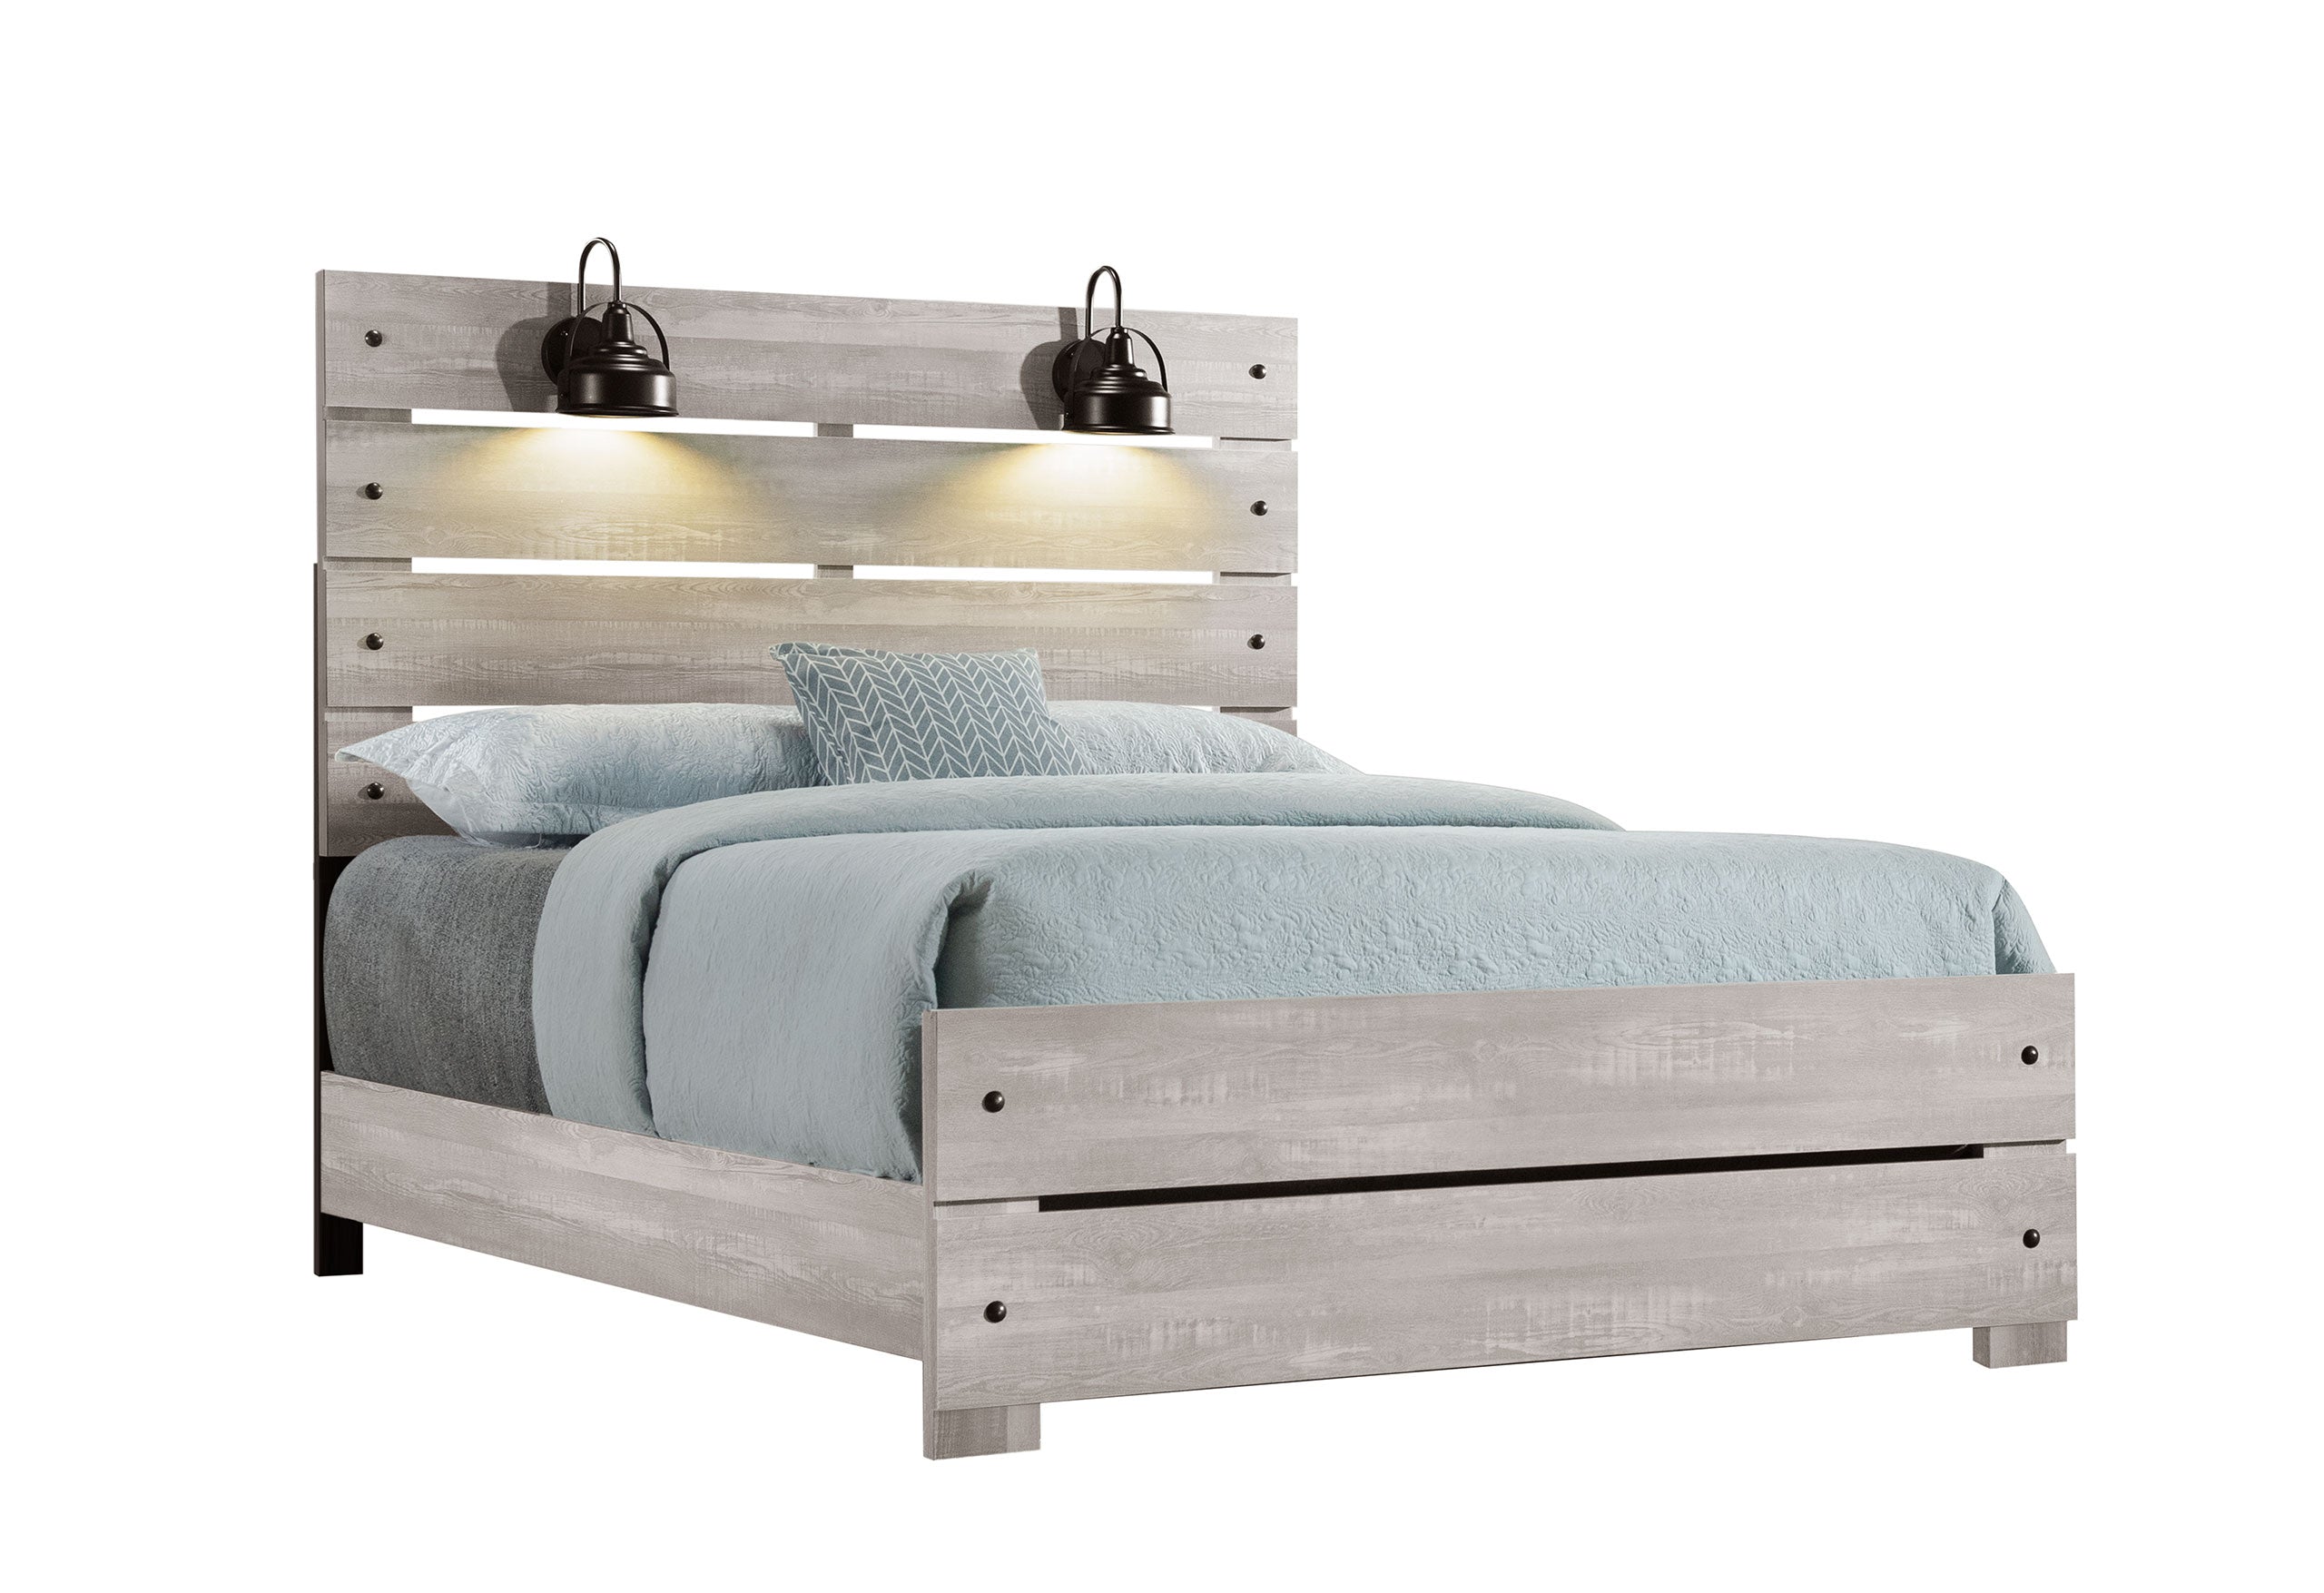 LINWOOD - BOOKCASE TWIN BED, FULL BED WITH LAMPS, KING BED WITH LAMPS, QUEEN BED WITH LAMPS, FULL BED WITH LAMPS, KING BED WITH LAMPS, QUEEN BED WITH LAMPS